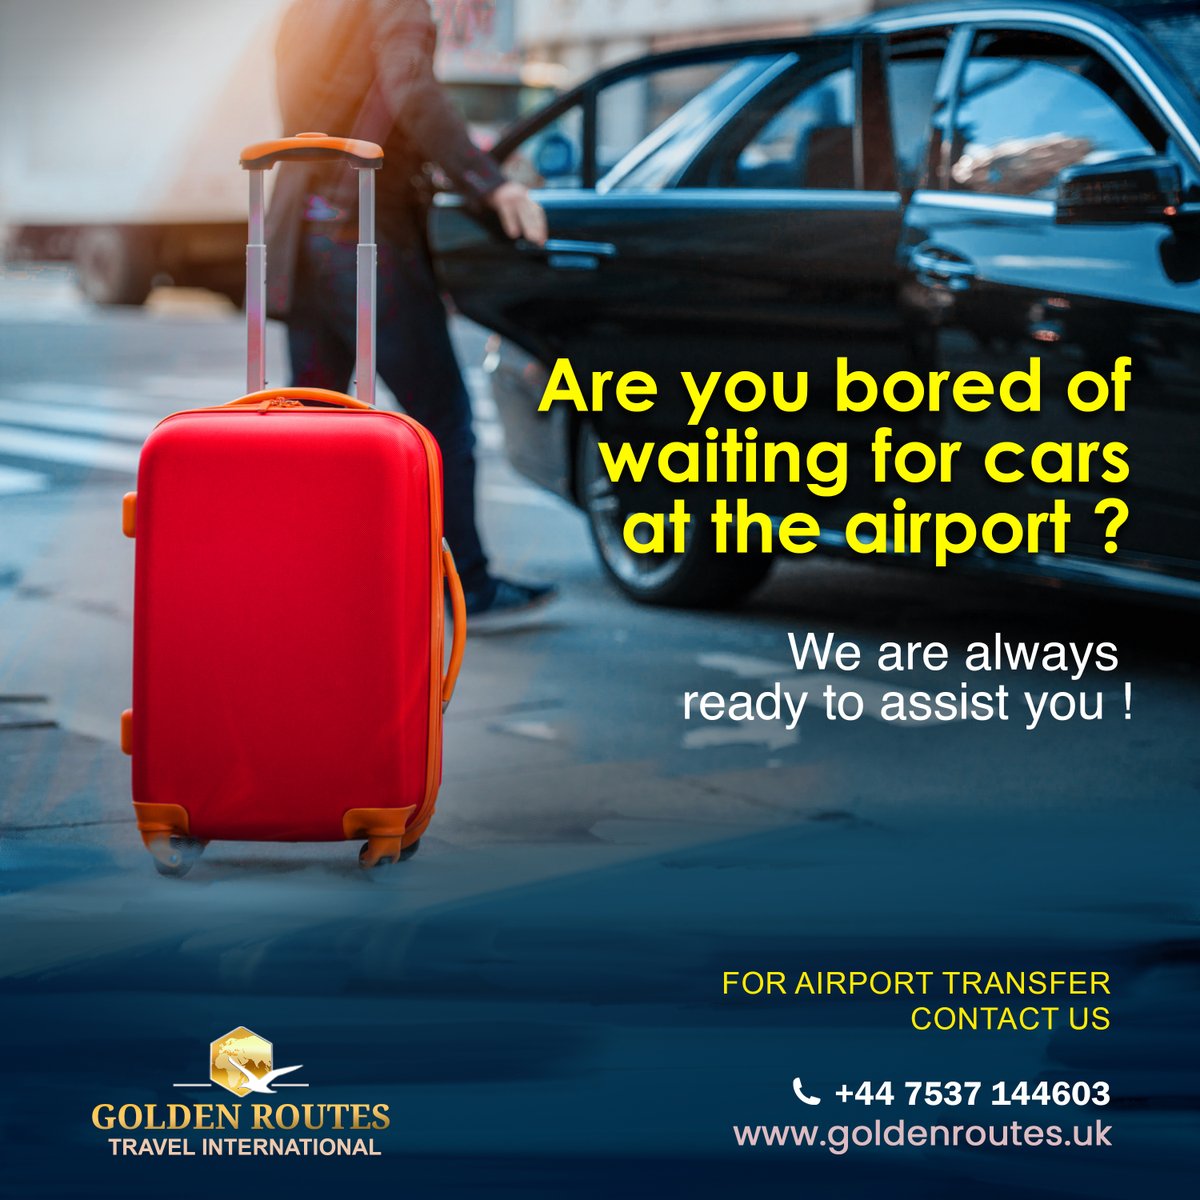 Always ready at your doorsteps.
Book your car
office@goldenroutes.uk
+41 76 482 77 66
#airporttransfers #airporttransfer #chauffeurservice #airport #travel #chauffeur #limousine #vip #limoservice #taxi #taxiservice #luxurytravel #transfer #privatedriver #transportation #business